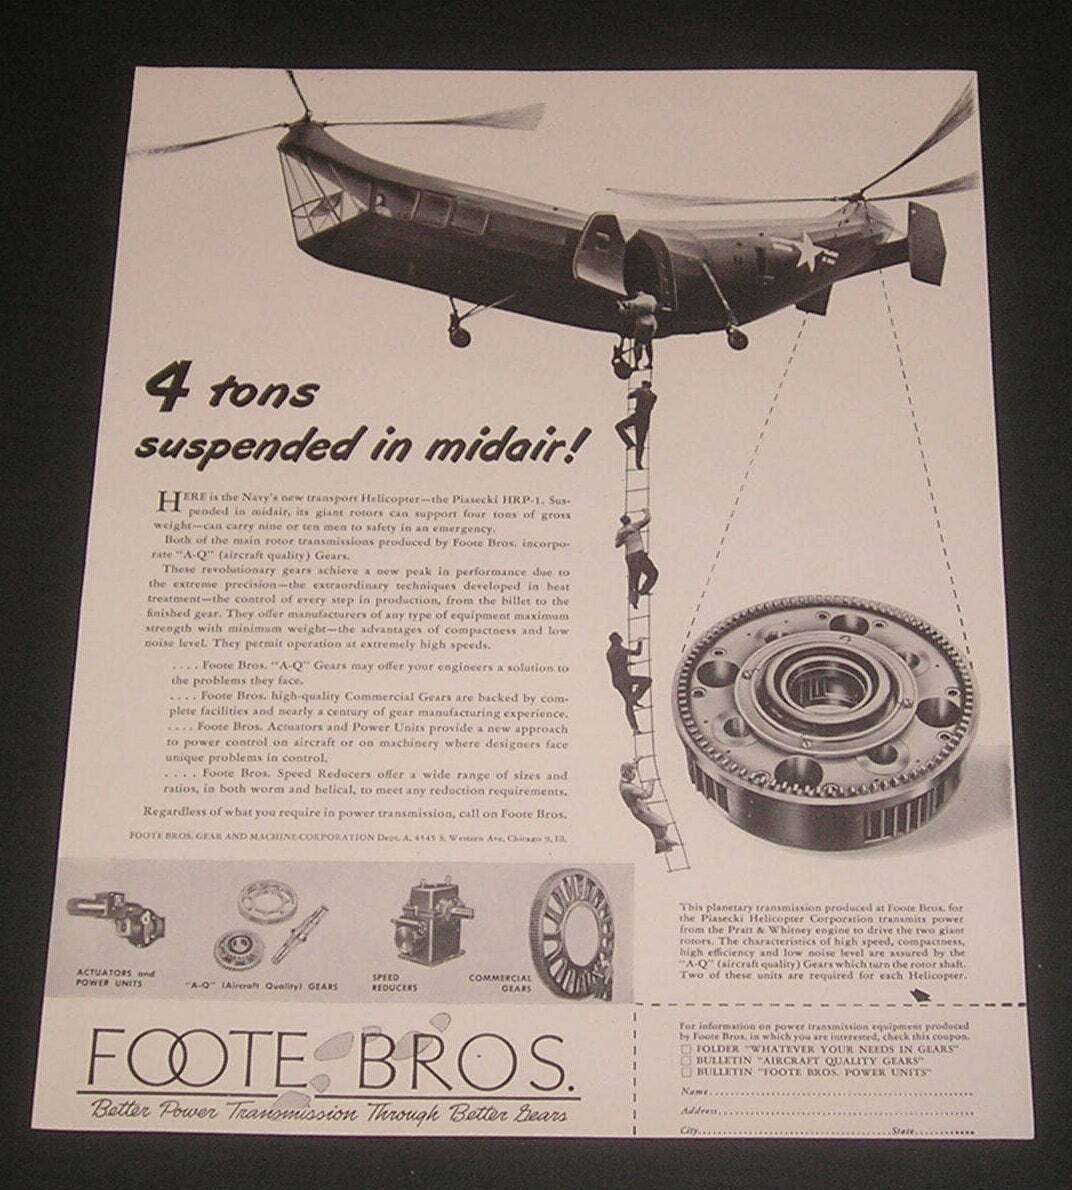 1948 US Navy Piasecki HRP-1 Military Transport Helicopter Foote Bros Magazine Ad